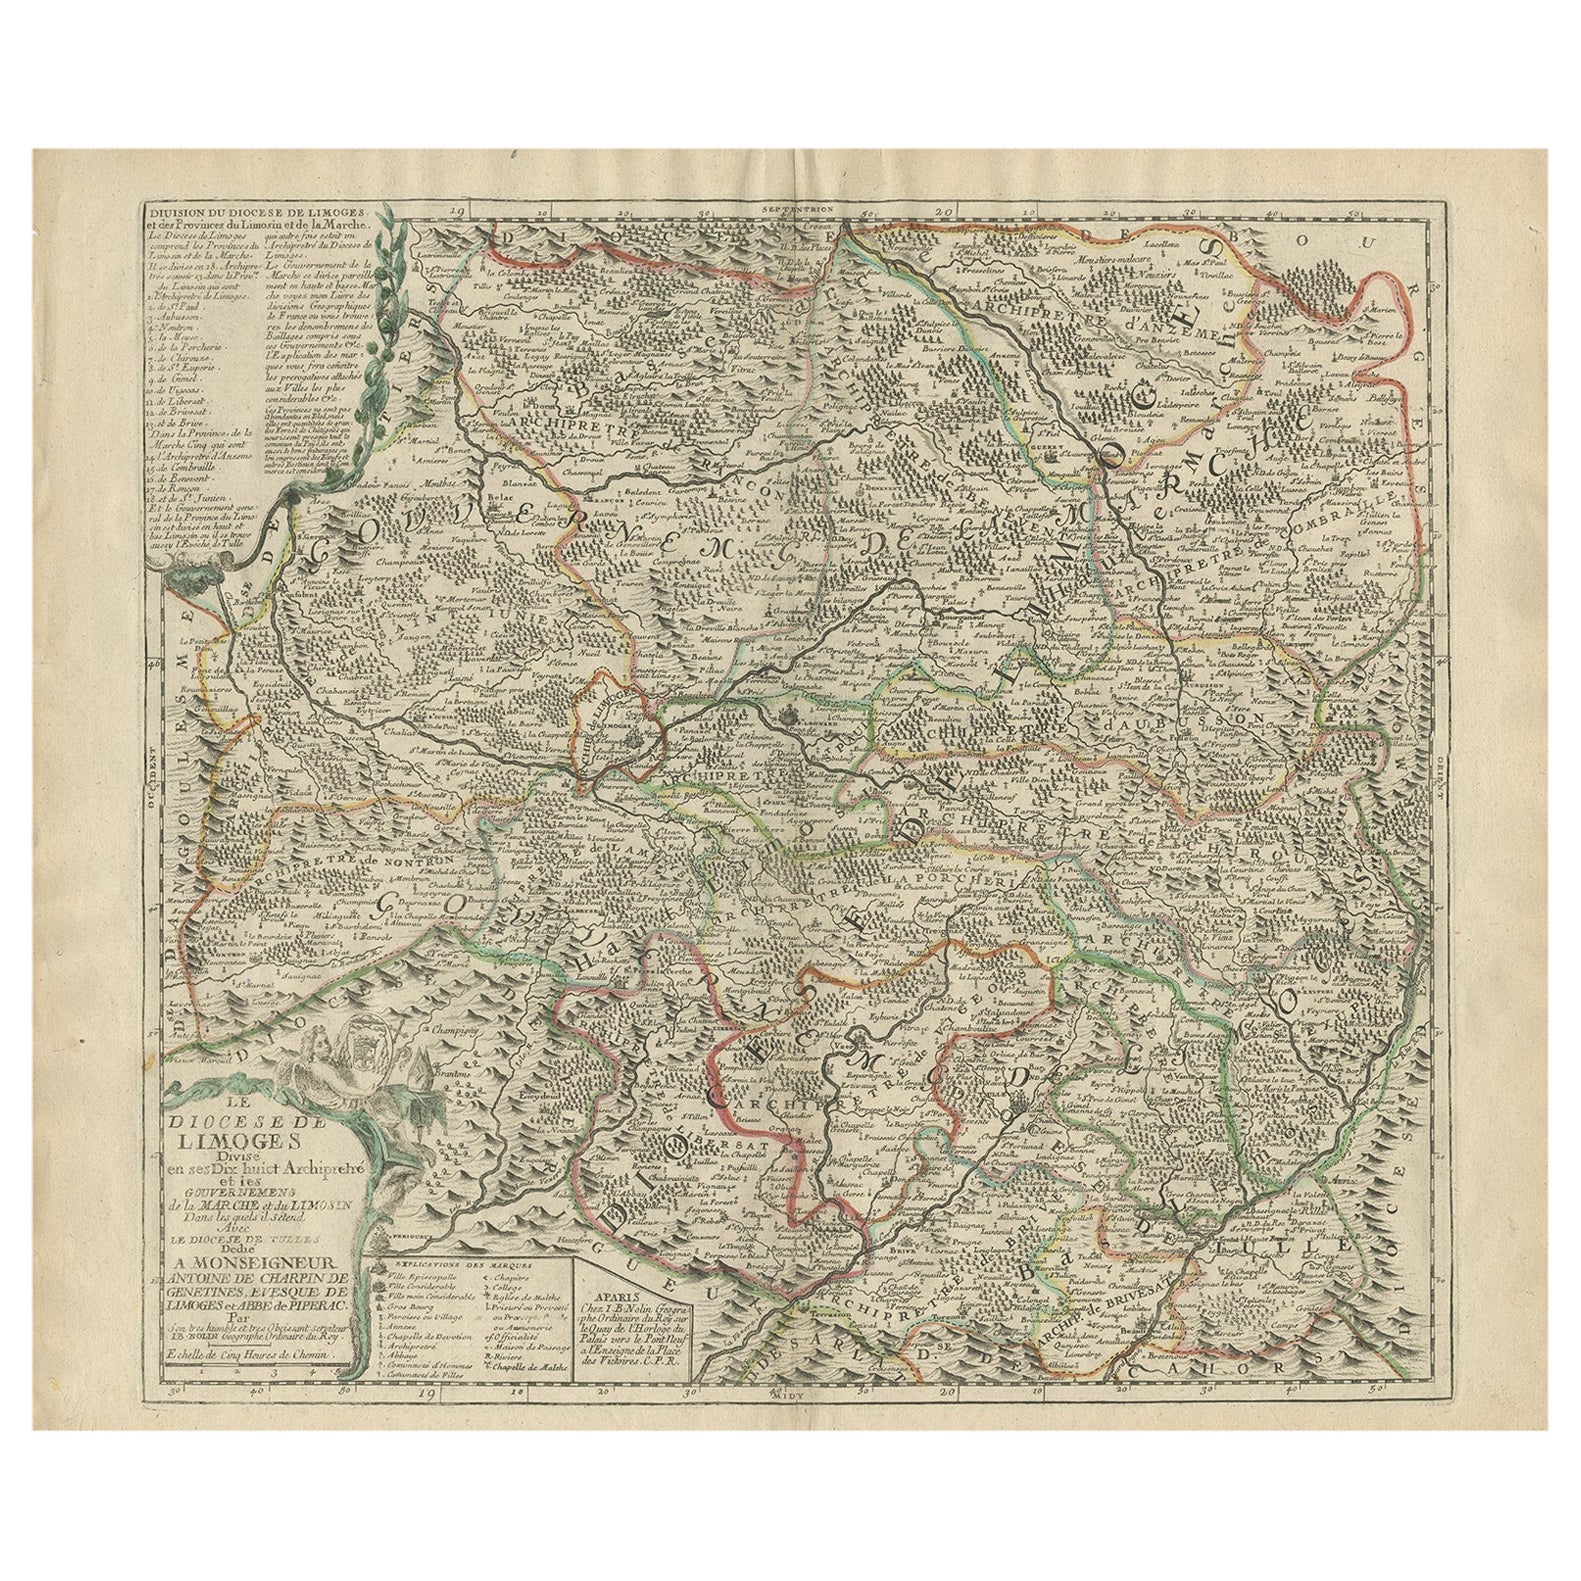 Antique Map of the Limoges Region in France, c.1690